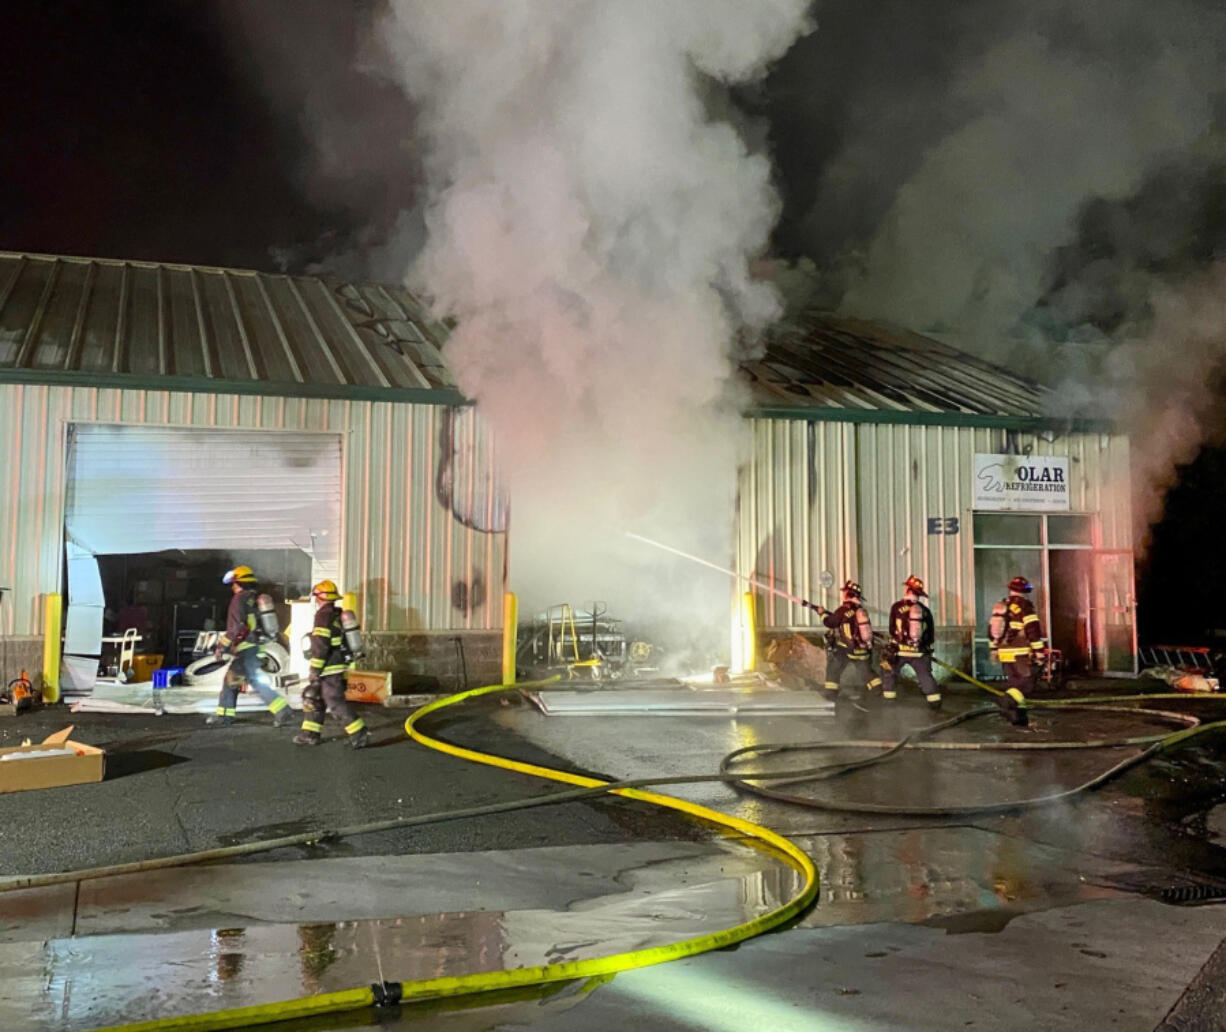 Firefighters battle a blaze Tuesday morning at an Orchards business complex. The building was unoccupied at the time, and no one was injured.